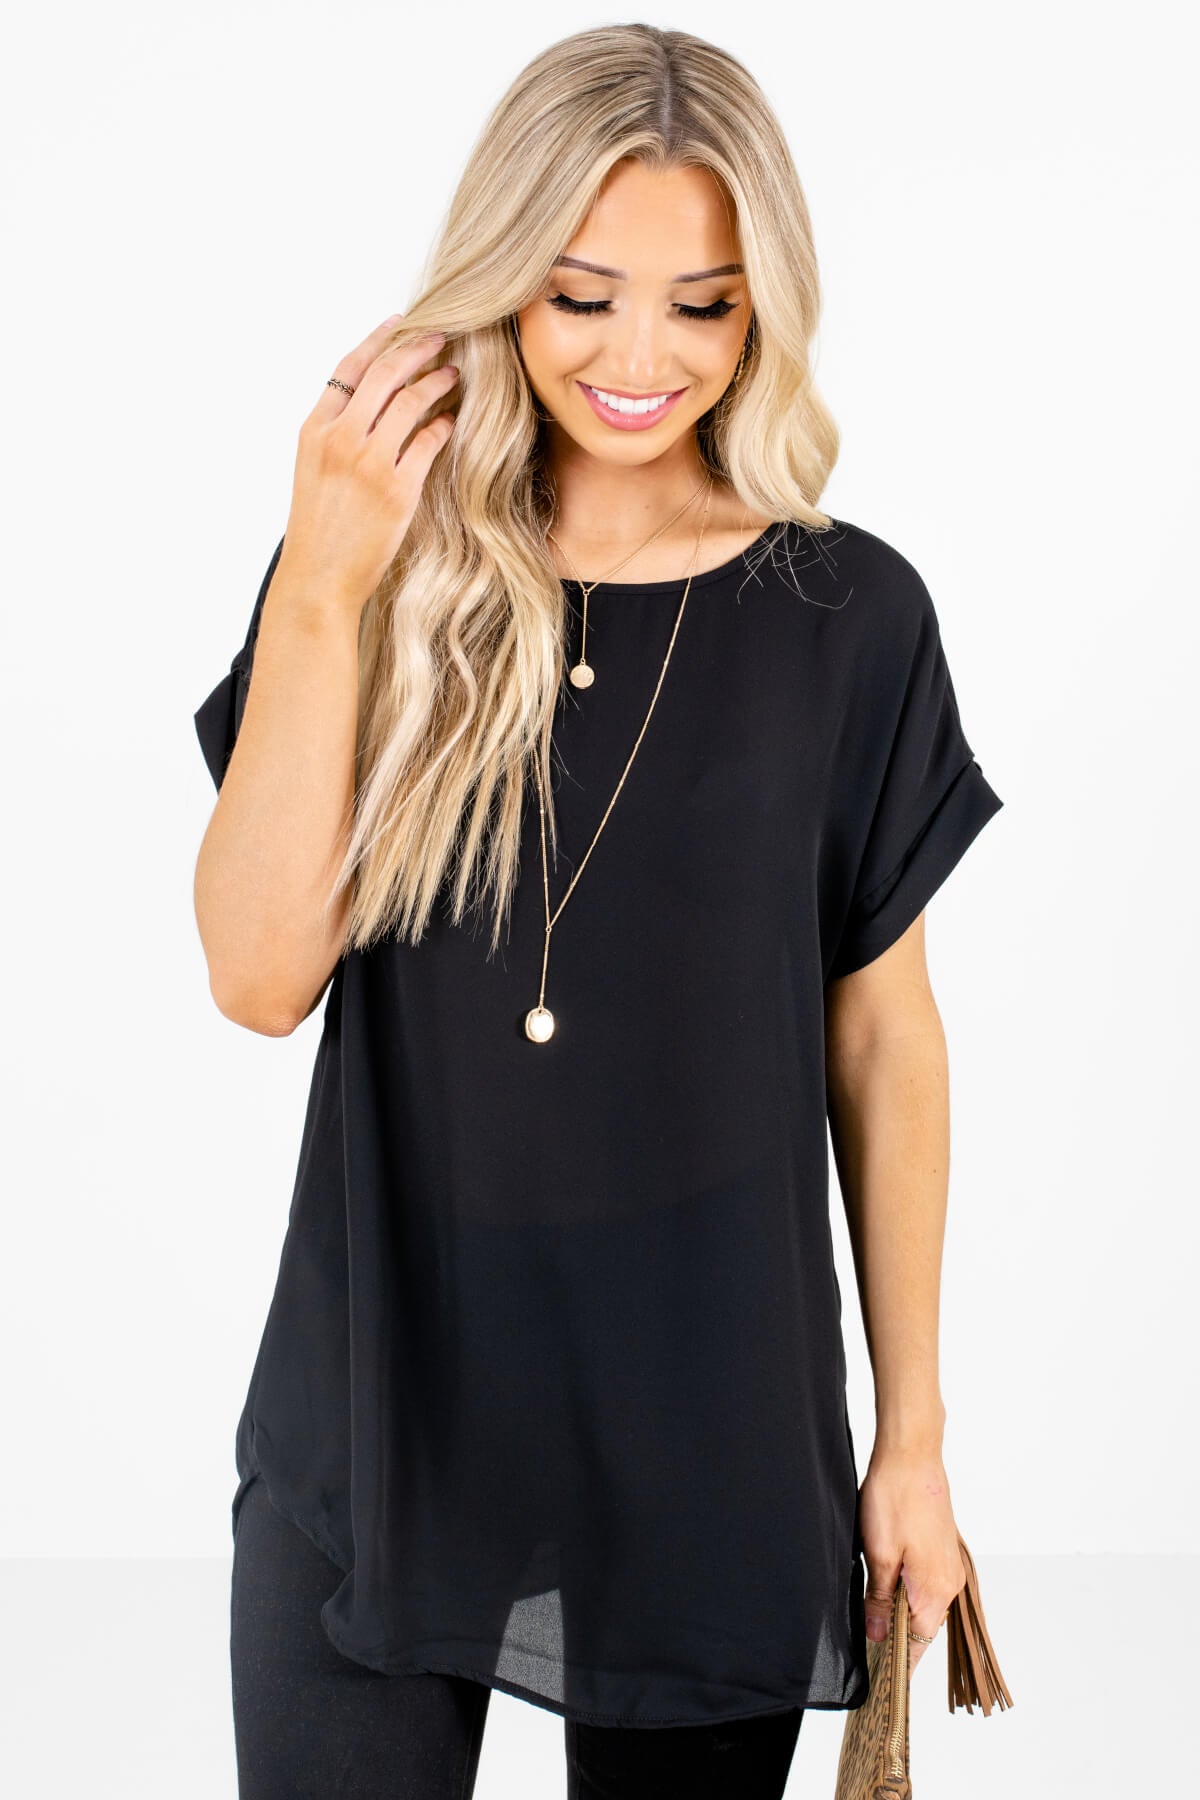 Black Lightweight and Flowy Boutique Blouses for Women